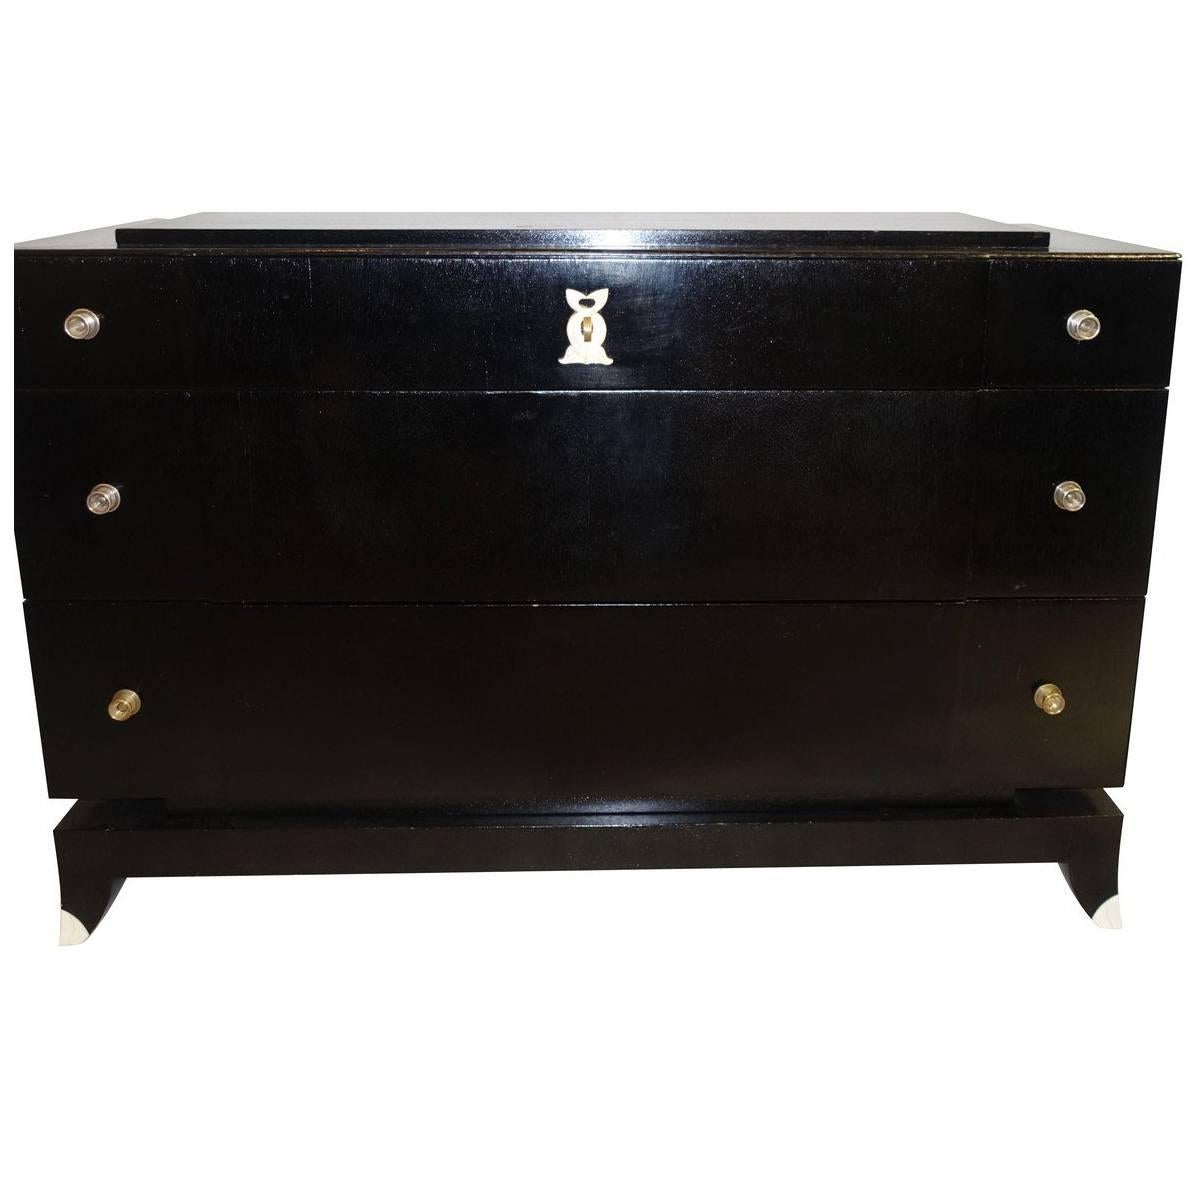 1930s French ebonized mahogany three drawer commode with tipped legs.
Unusual raised top.
Polished nickel pulls.
